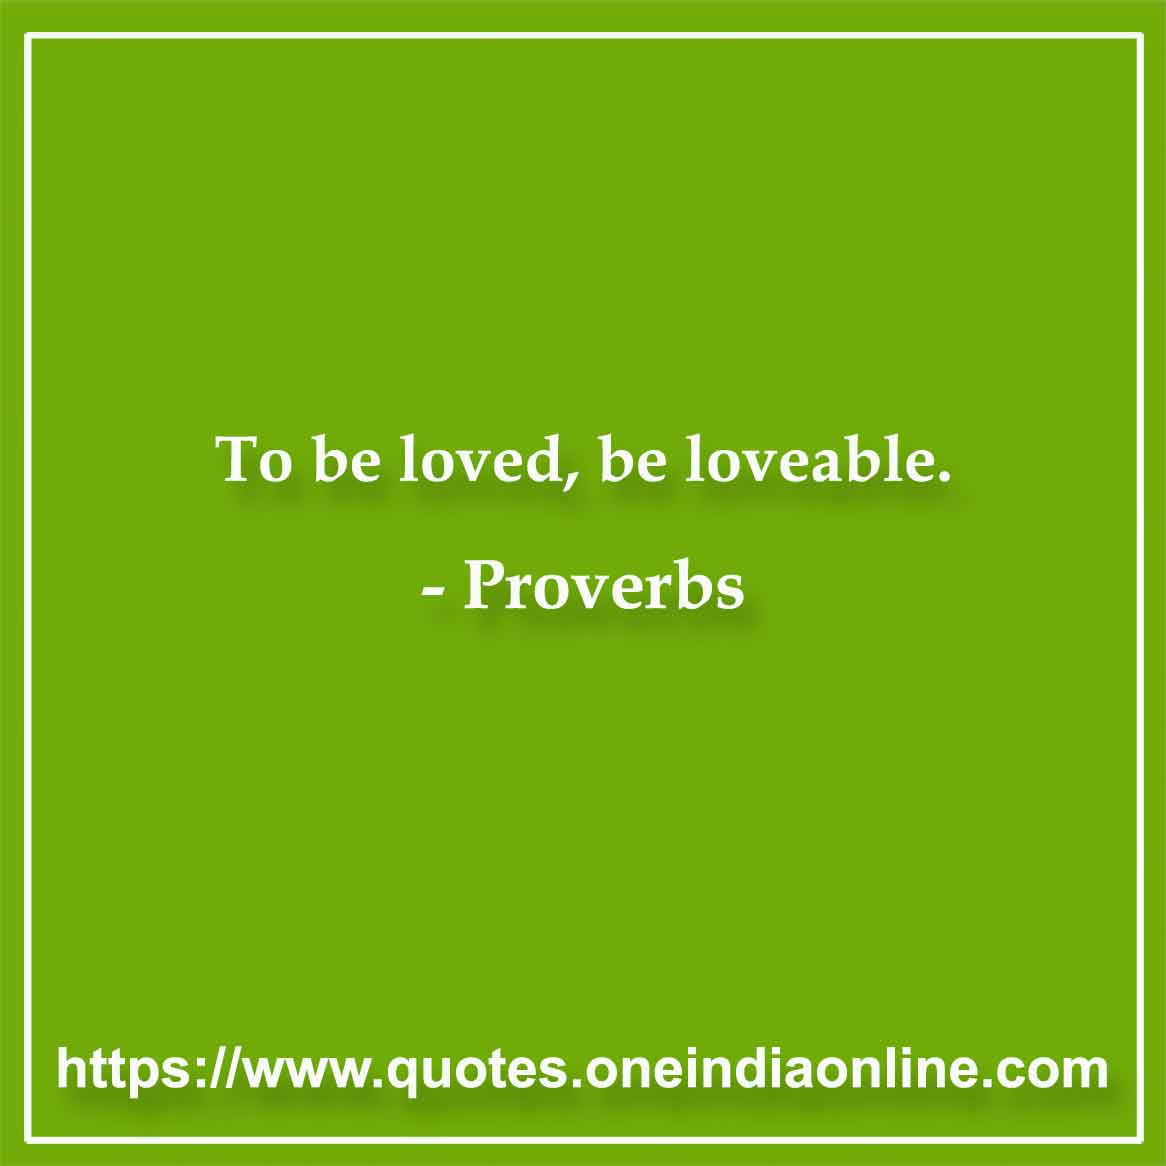 To be loved, be loveable.

Latin Proverbs